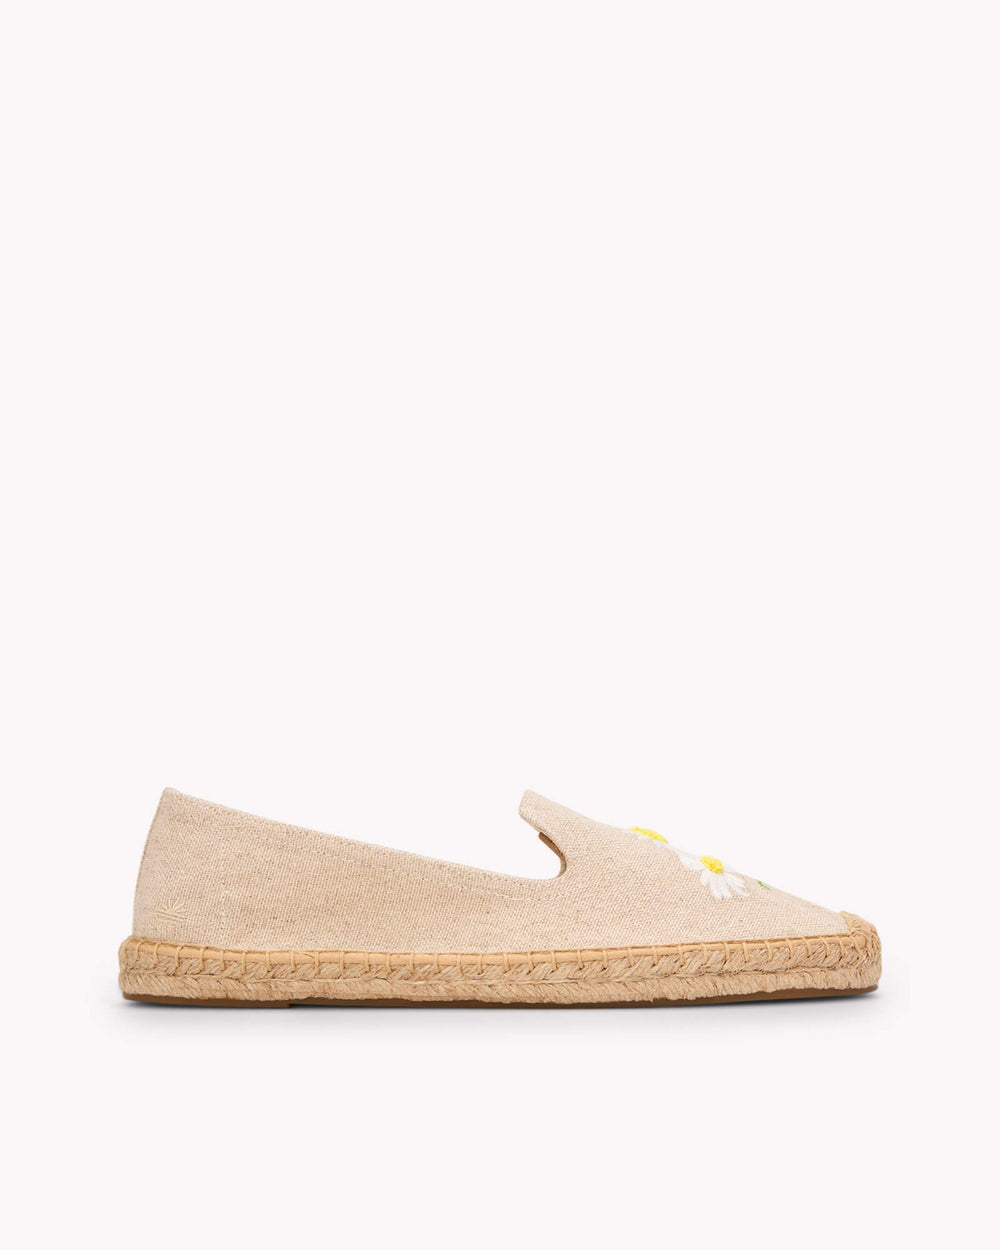 The Smoking Slipper - Embroidery / Daisy - Natural Undyed - Women's